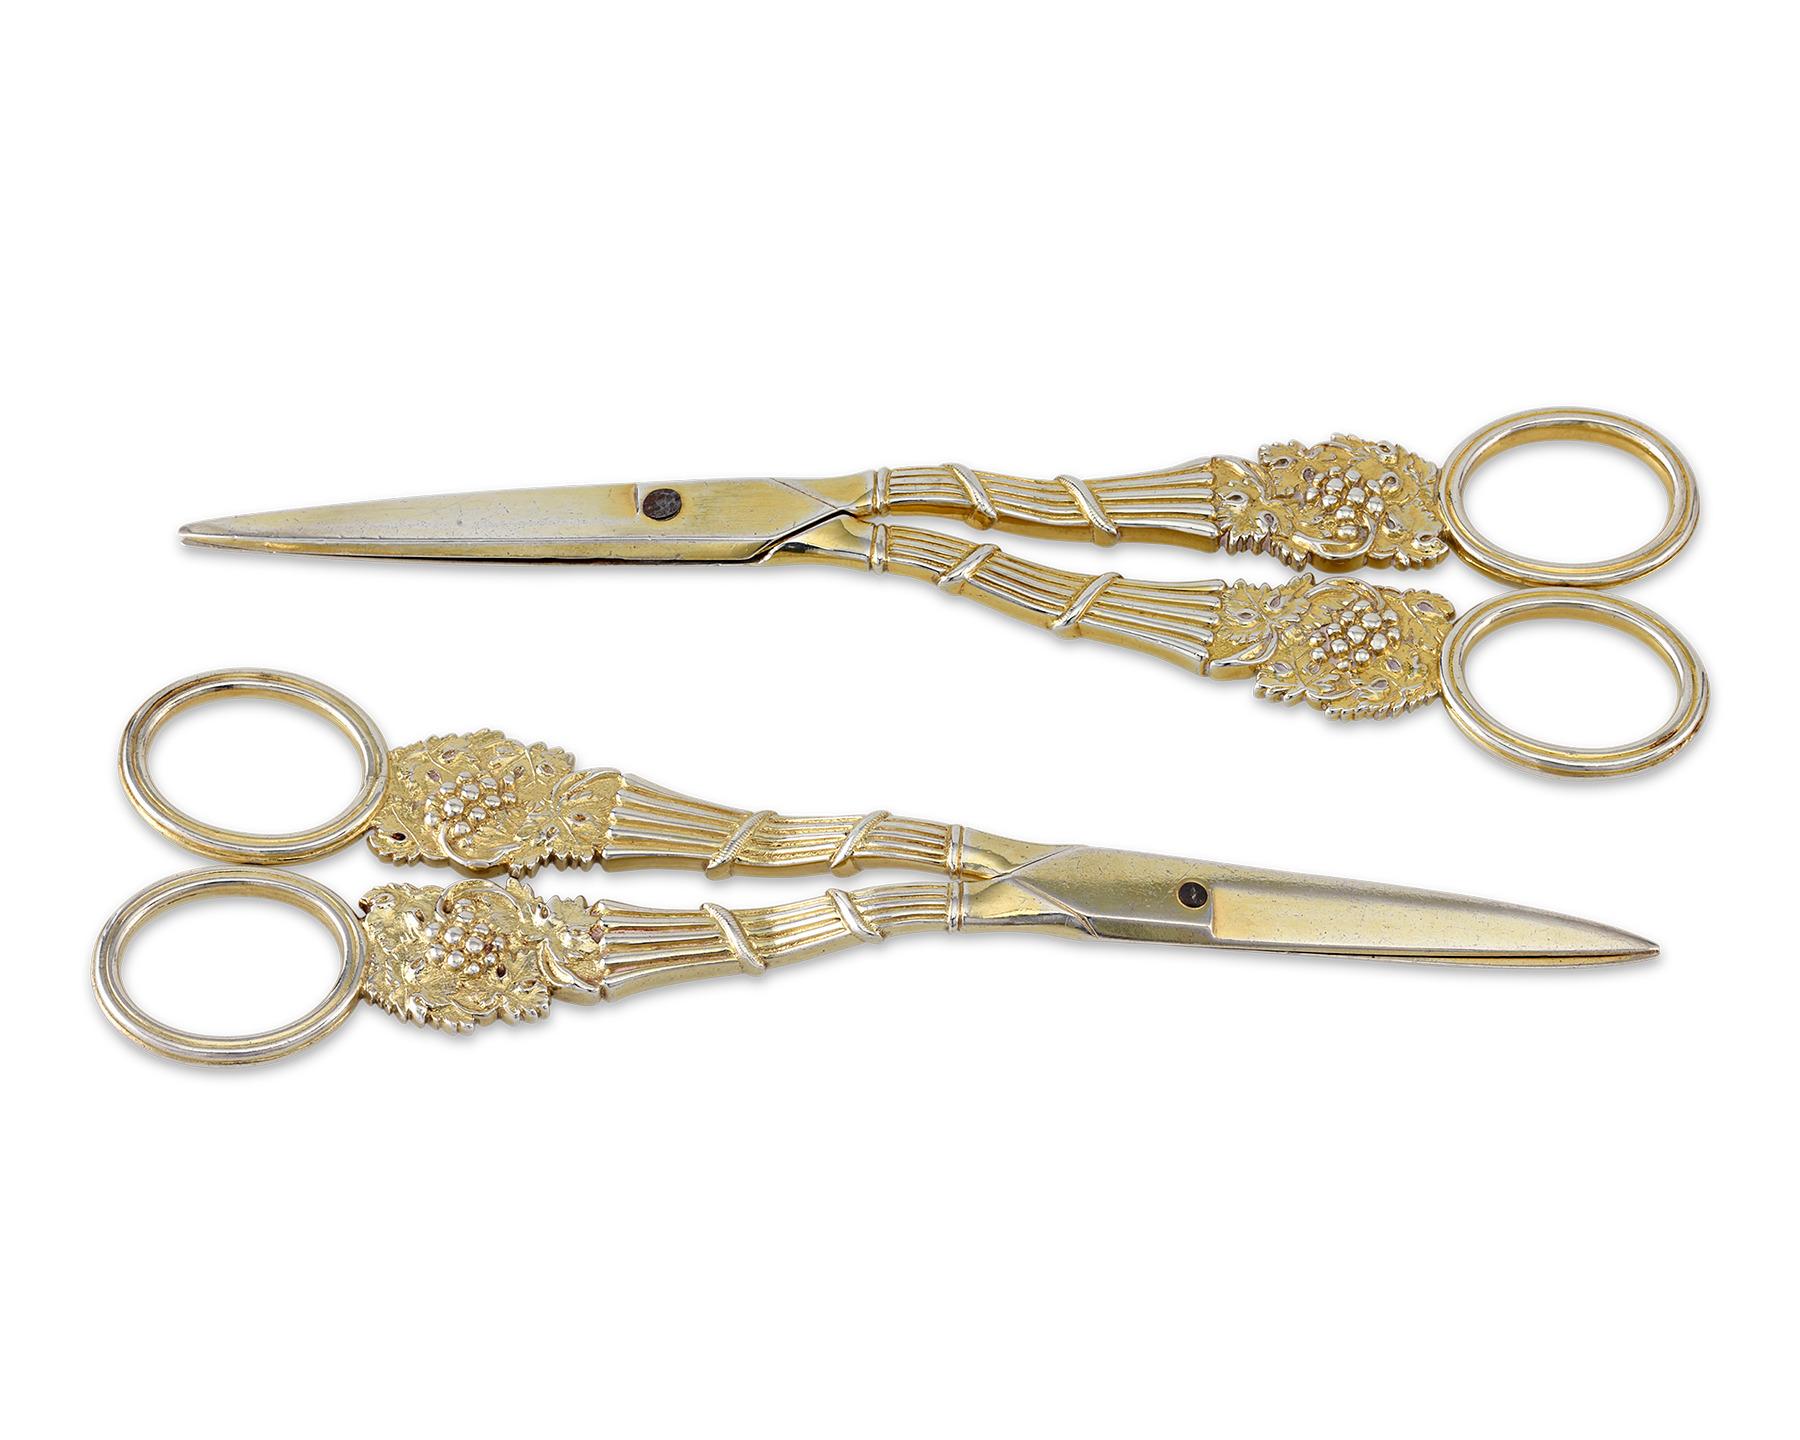 Comprised of silver-gilt, these two pairs of beautifully crafted grape shears were designed and manufactured in by famed London silversmiths William Eley and William Fearn. The pairs’ handles are cast elegantly with Bacchanal motifs of fruiting